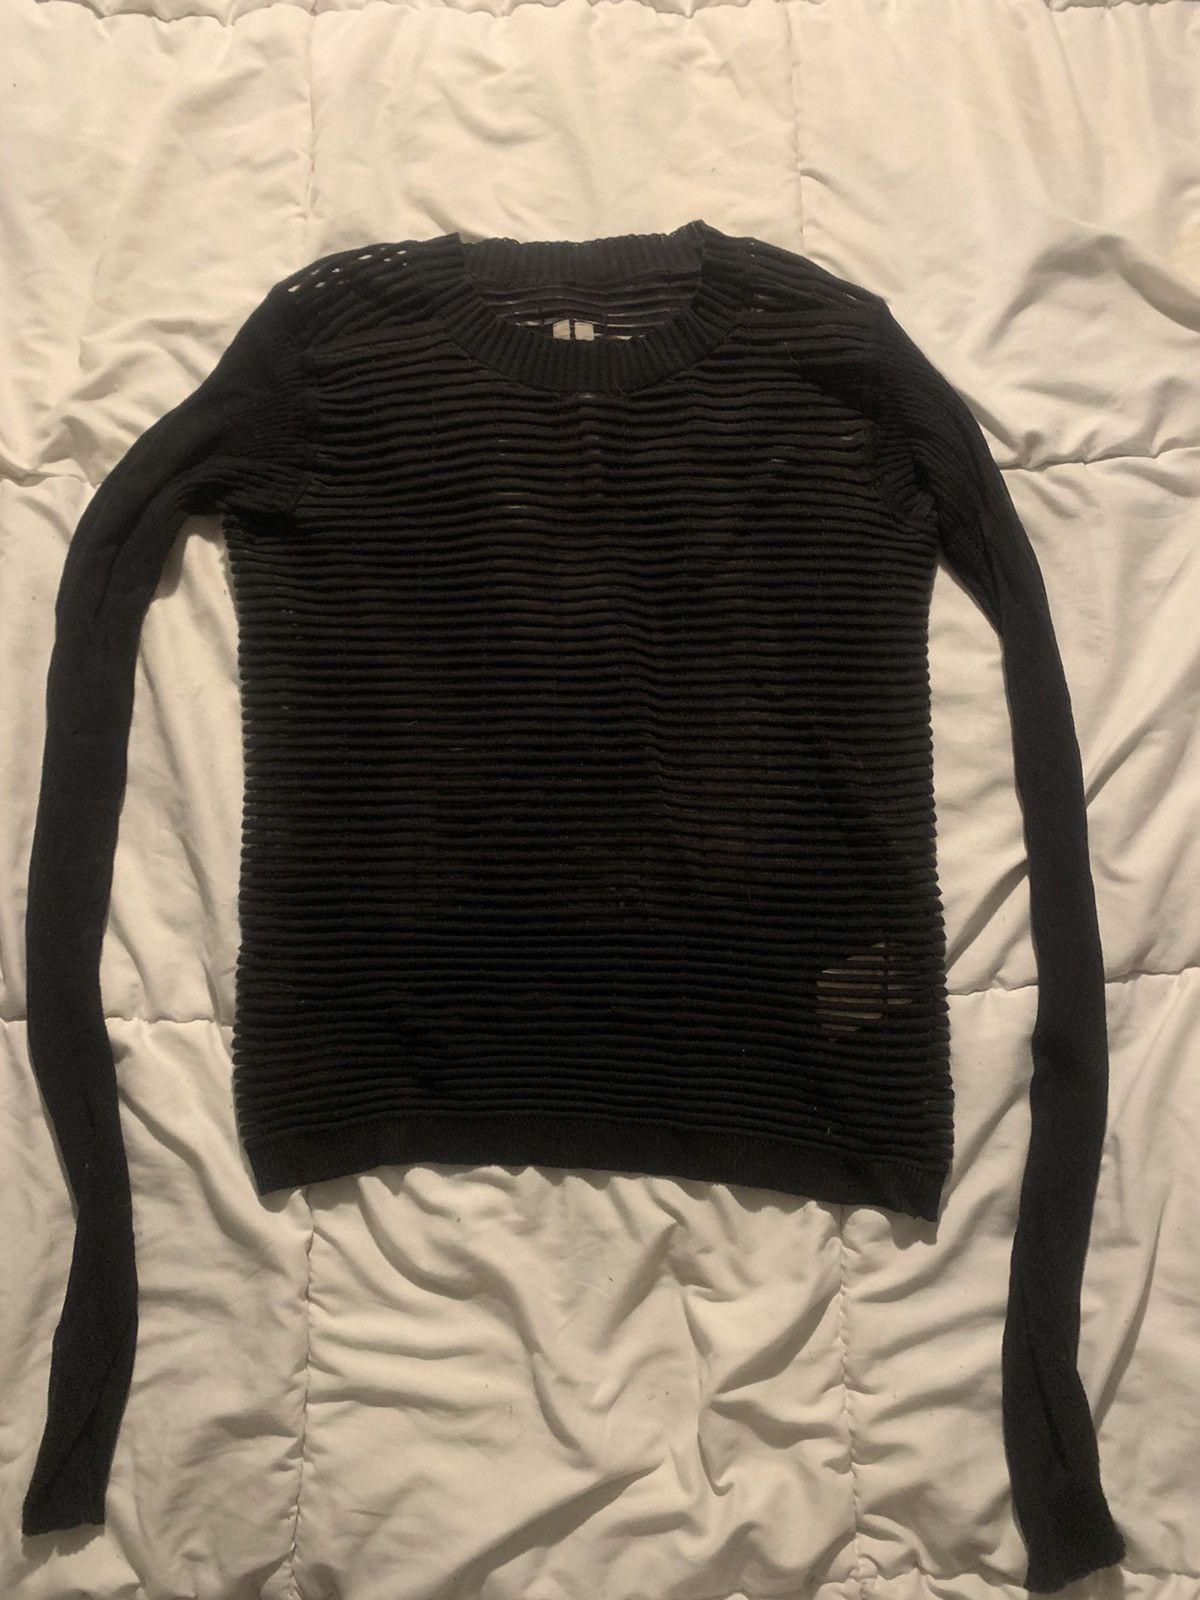 Rick Owens S/S15 Ribbed Knit Sweater Size US XS / EU 42 / 0 - 1 Preview